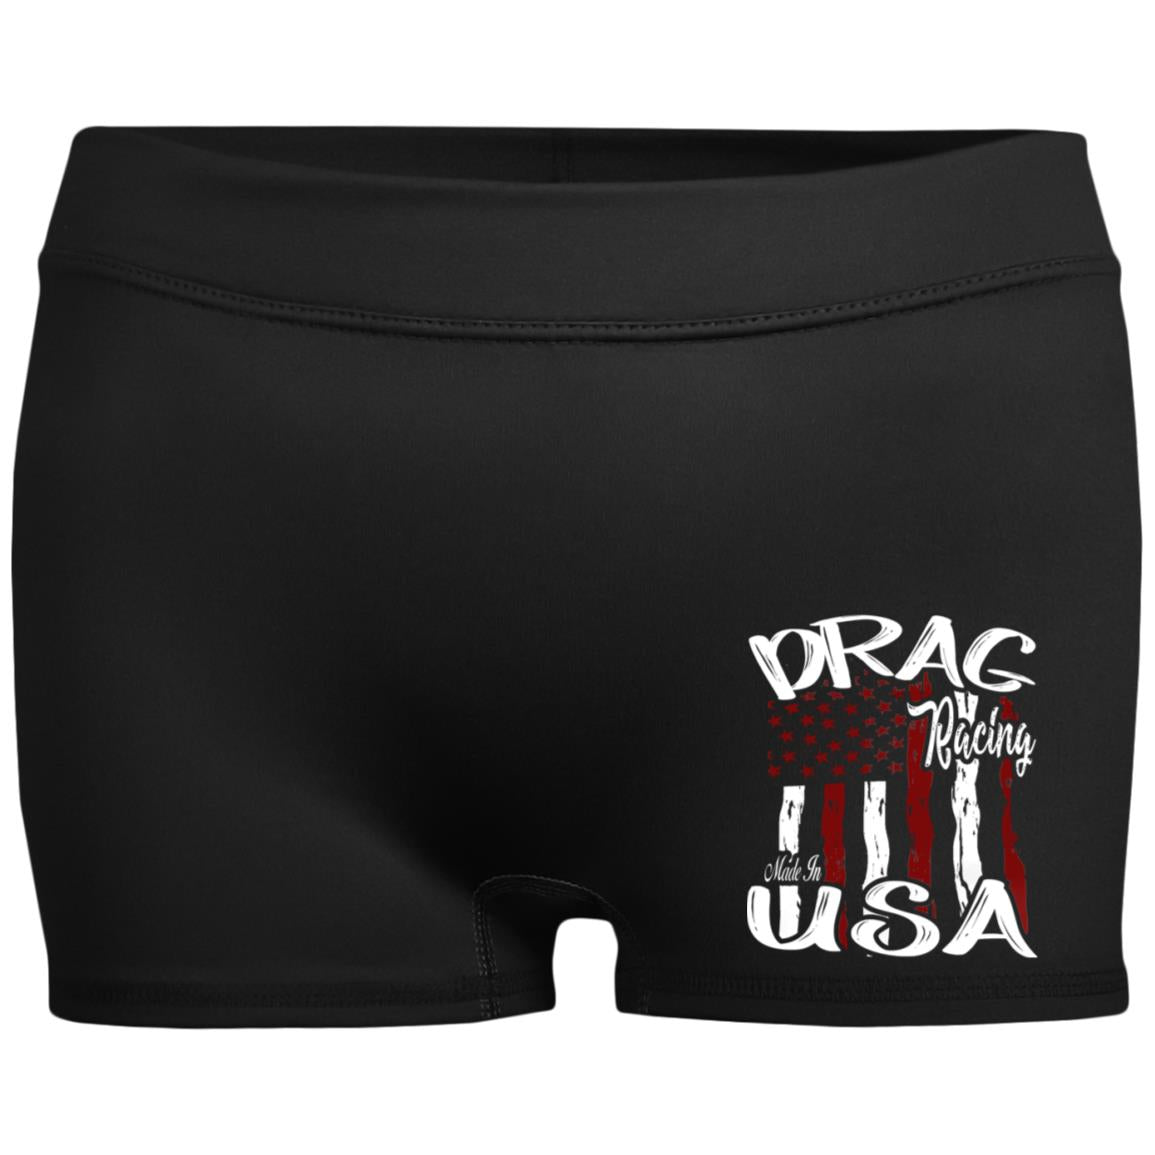 Drag Racing Made In USA Ladies' Fitted Moisture-Wicking 2.5 inch Inseam Shorts